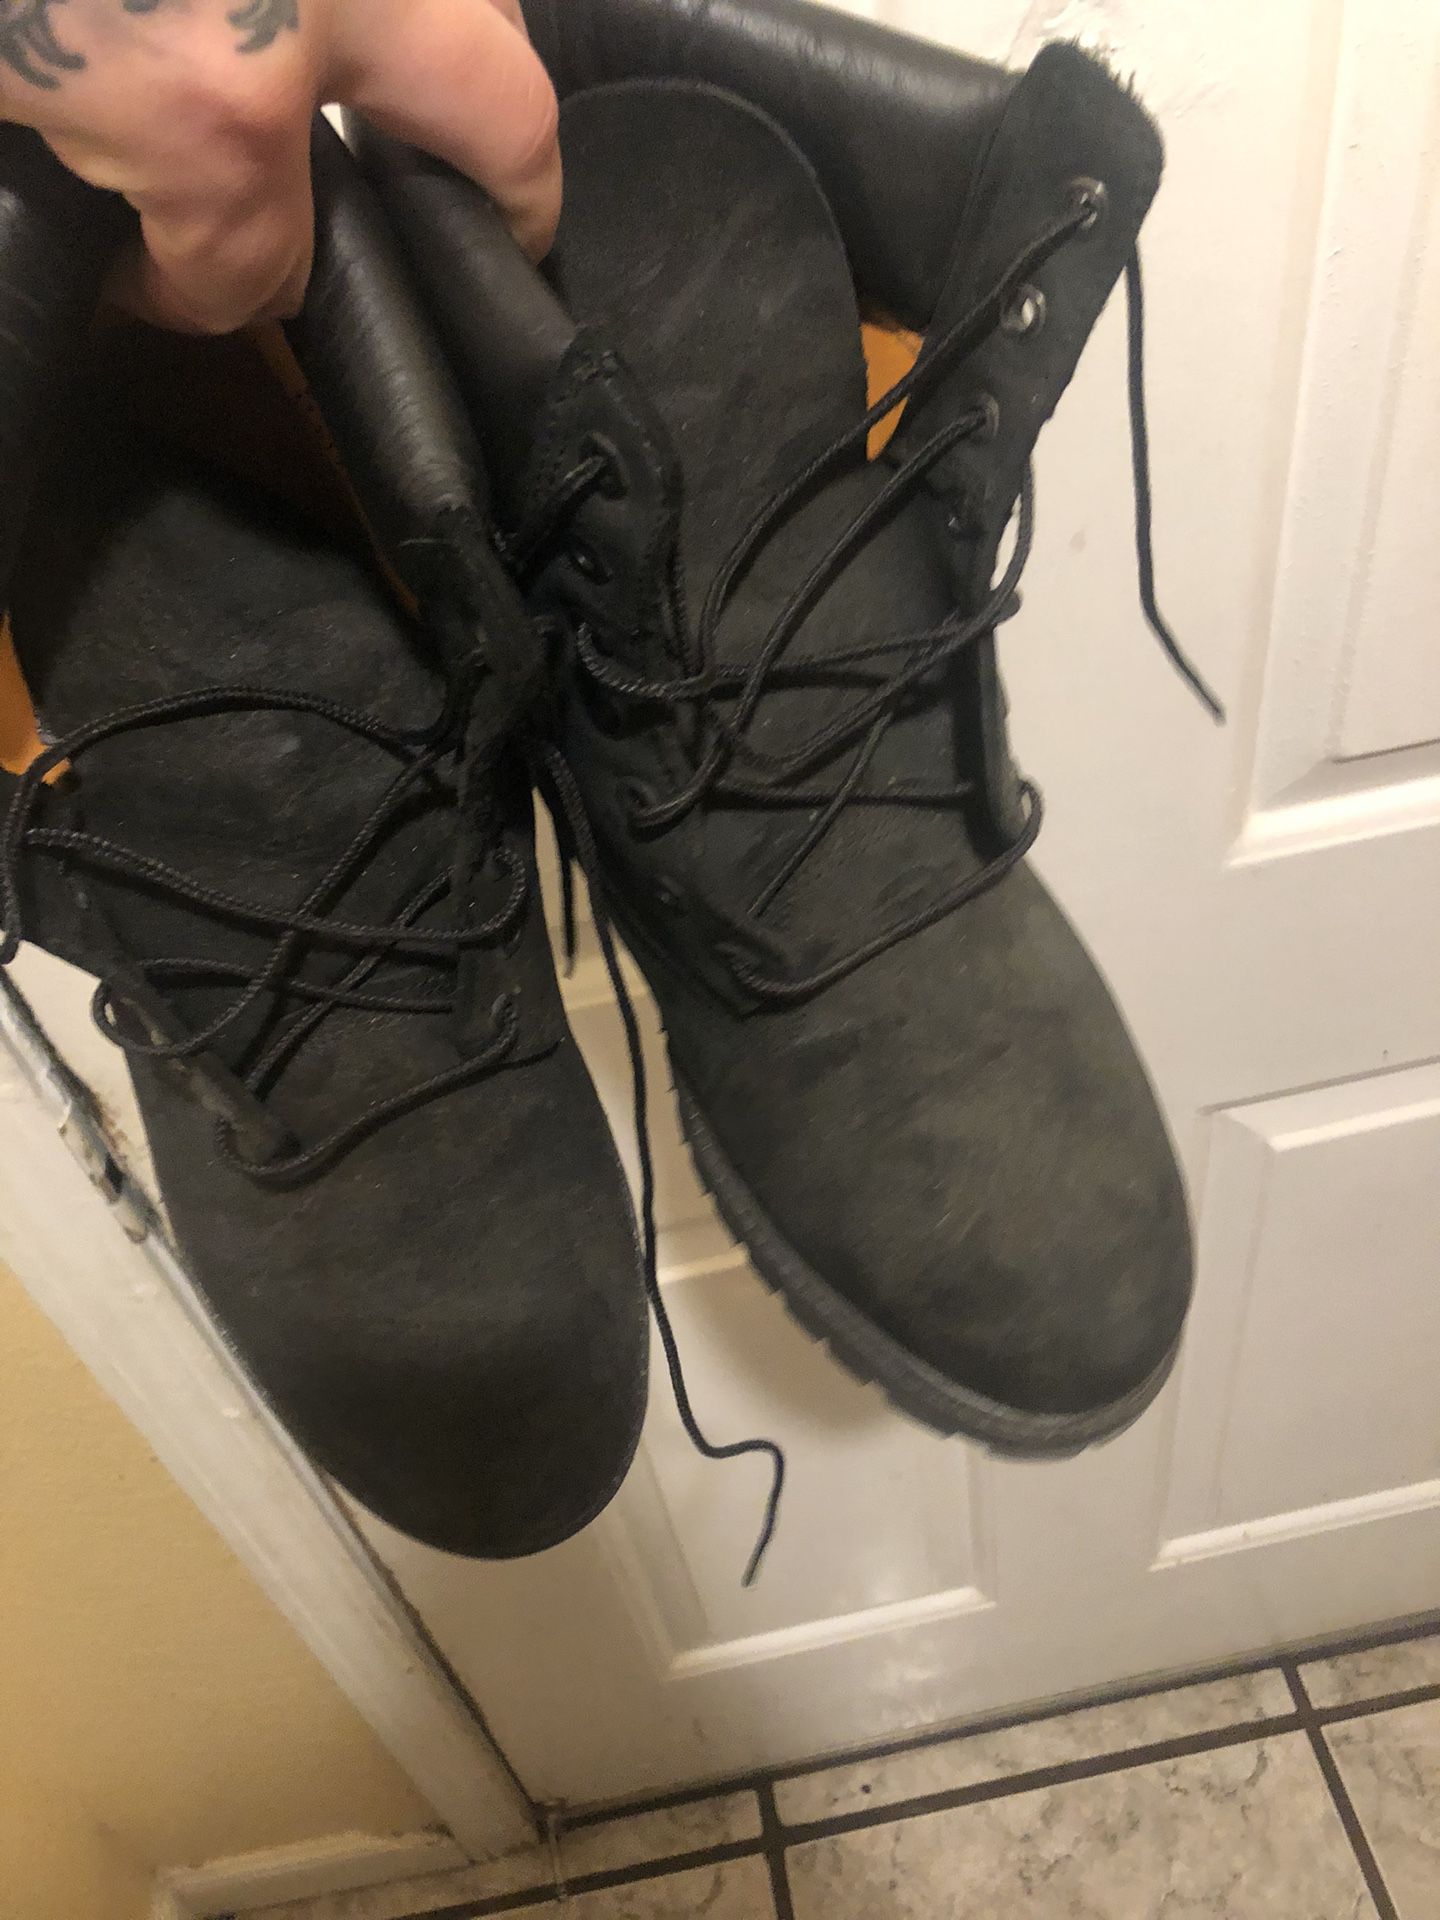 two pairs of men’s 10.5 timberland